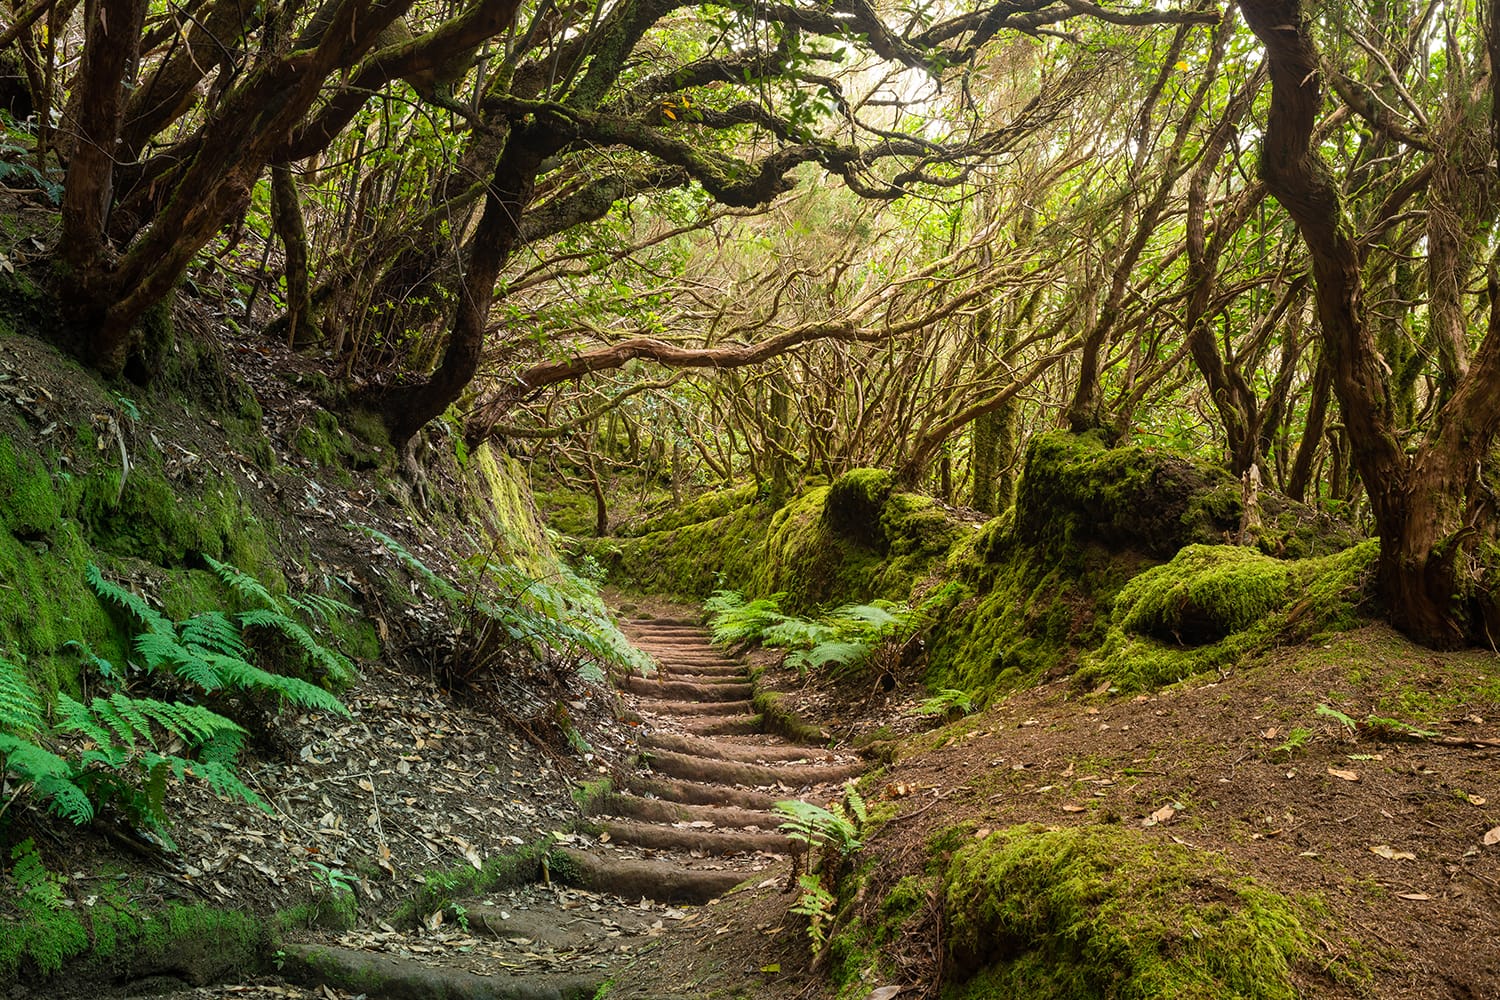 The path of the Enchanted forest in Anaga National Park, Tenerife, Canary Islands